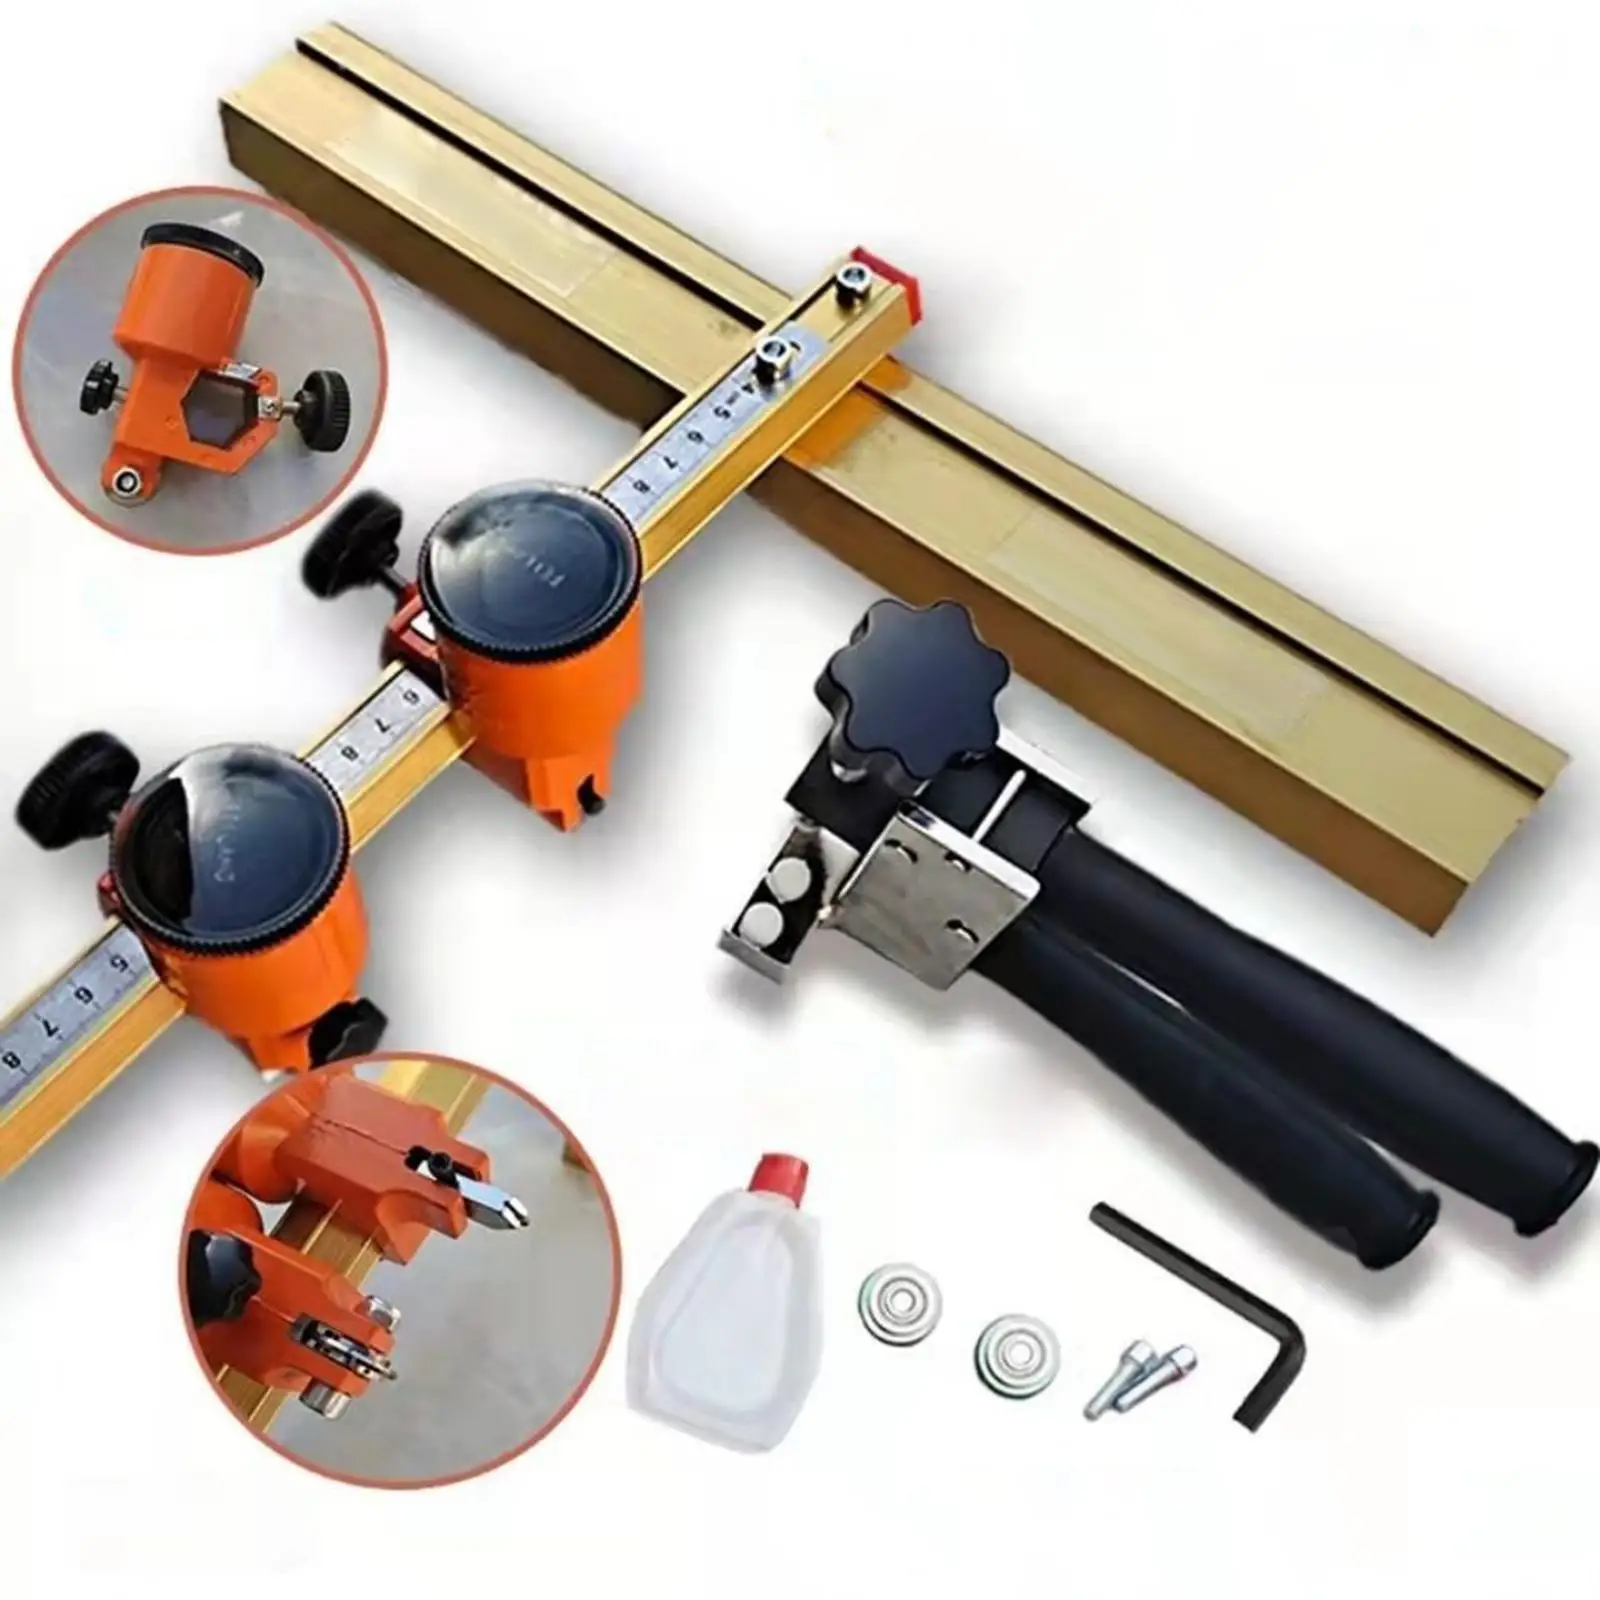 Glass Cutter Crafts DIY Project Self Controlled Oiling Glass Tile Cutter Professional Accessories for Ceramic Tile Mirrors